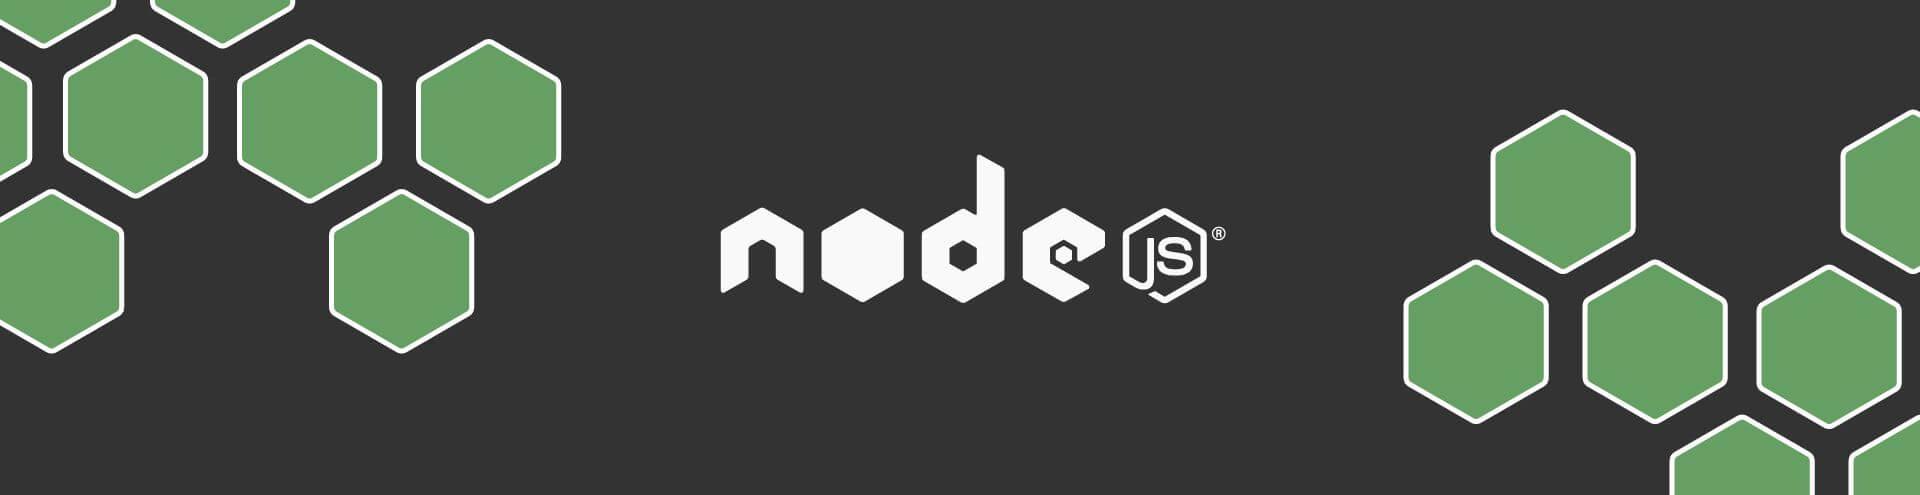 How to Improve Node.js Productivity  With C++ Addons: Step by Step Guide